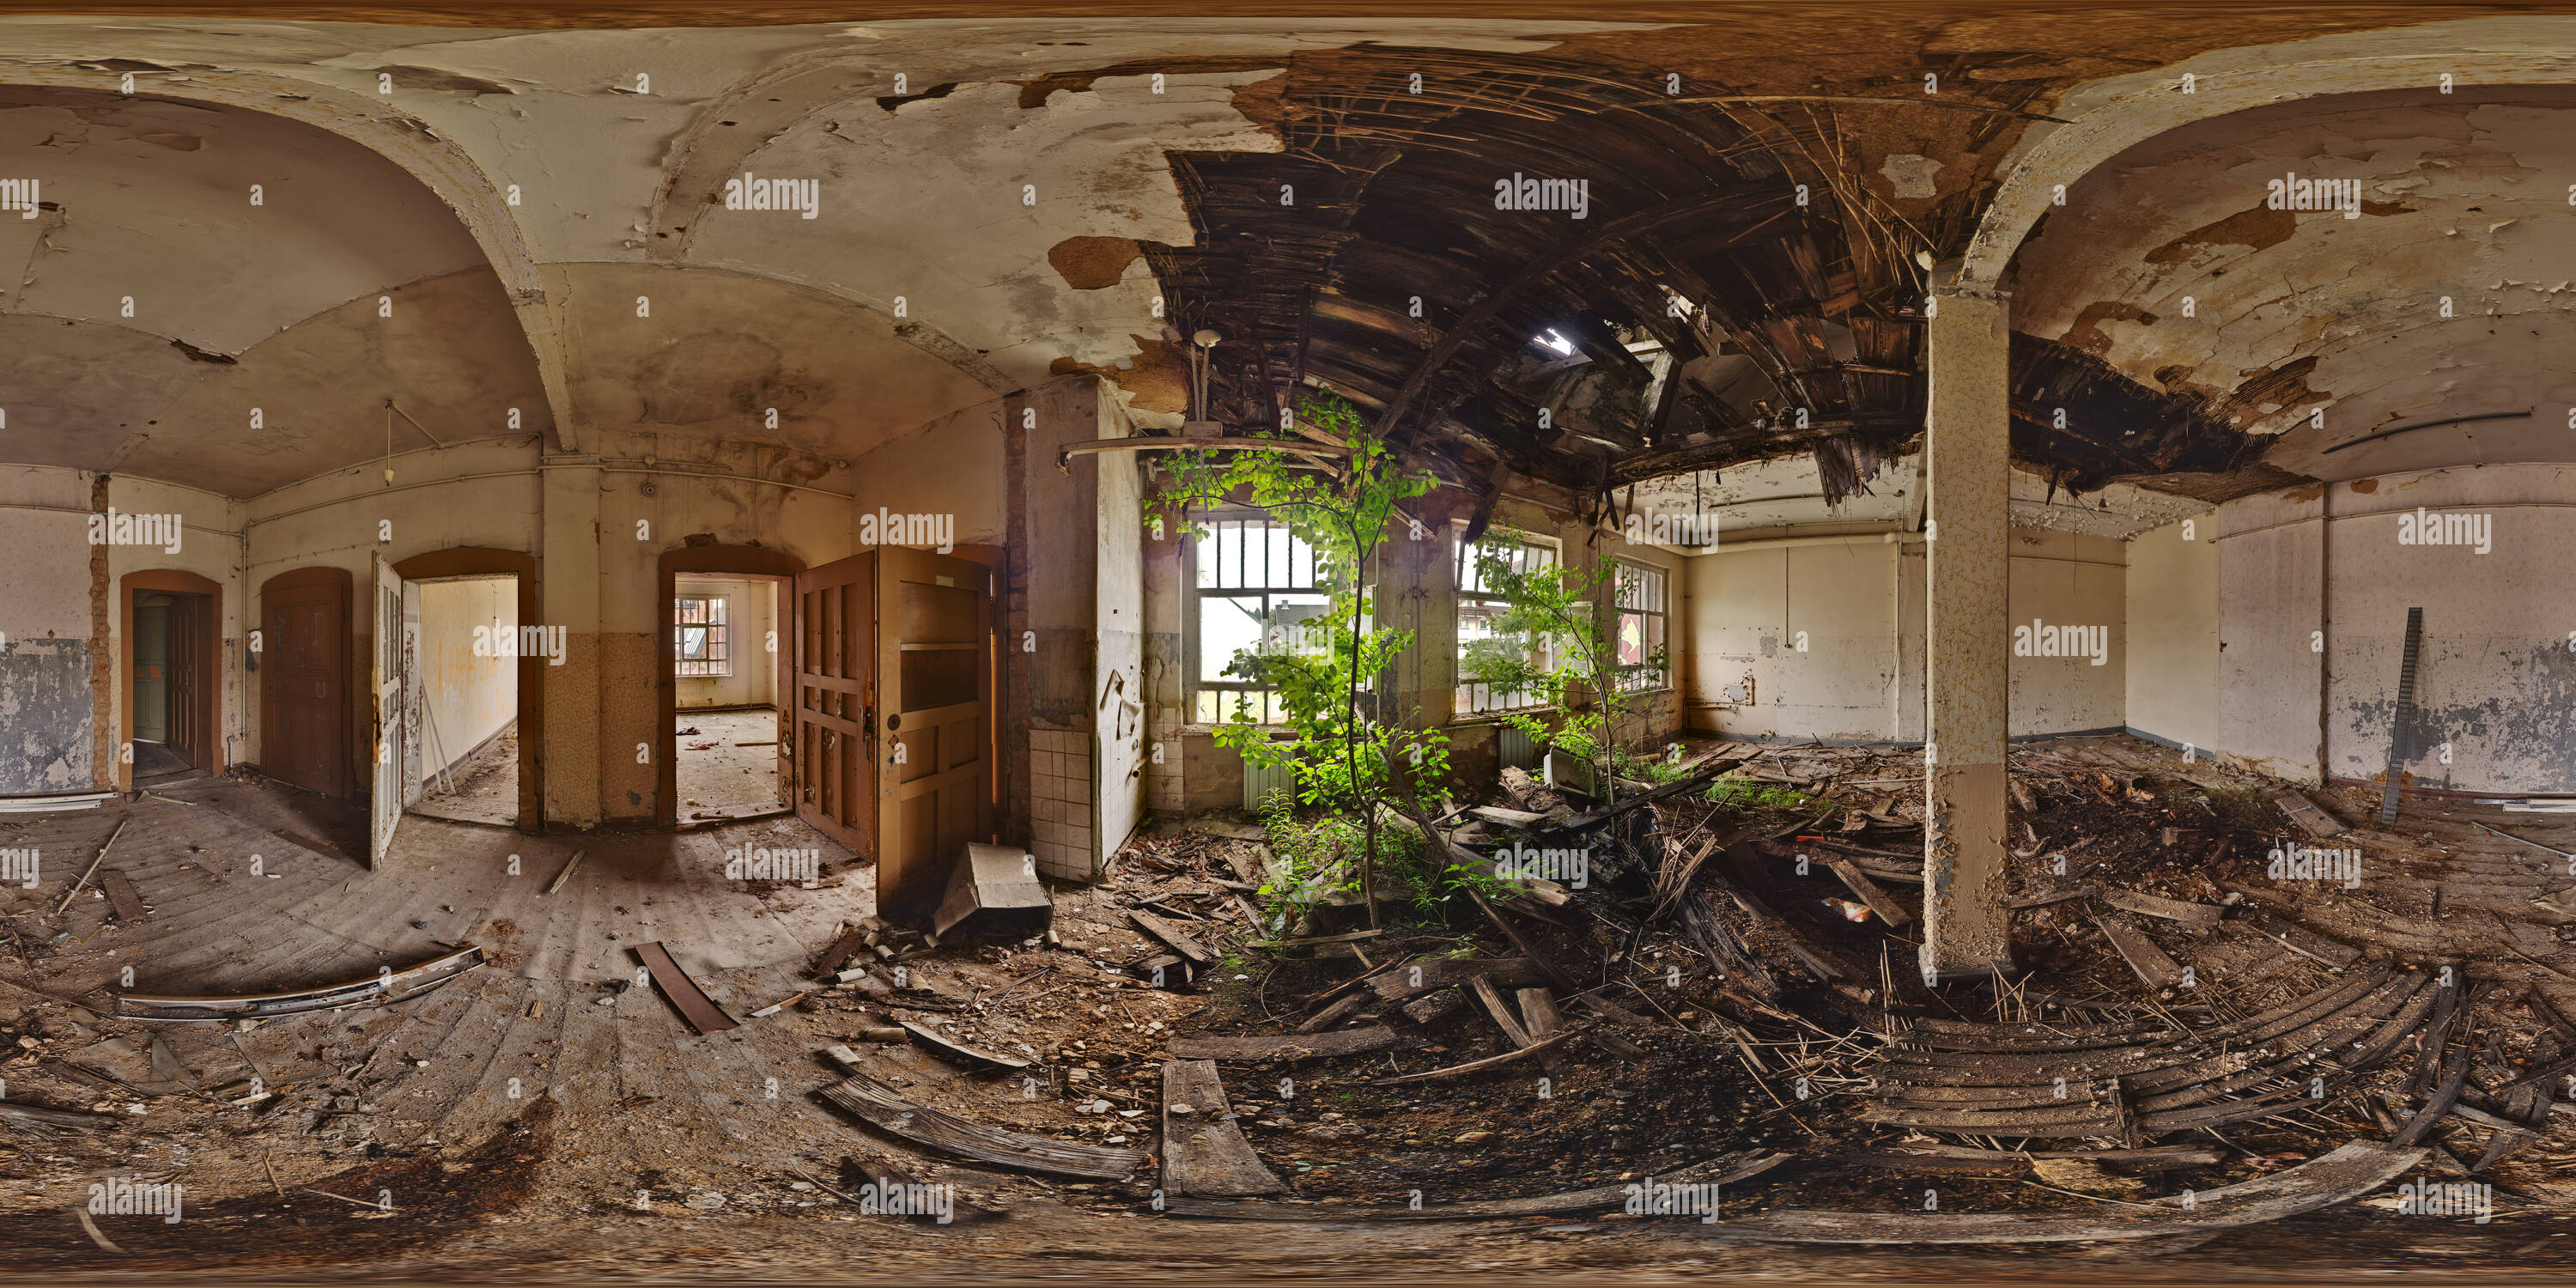 360 degree panoramic view of ruin of textile factory 'Berger' in Lichtenstein, saxony, germany